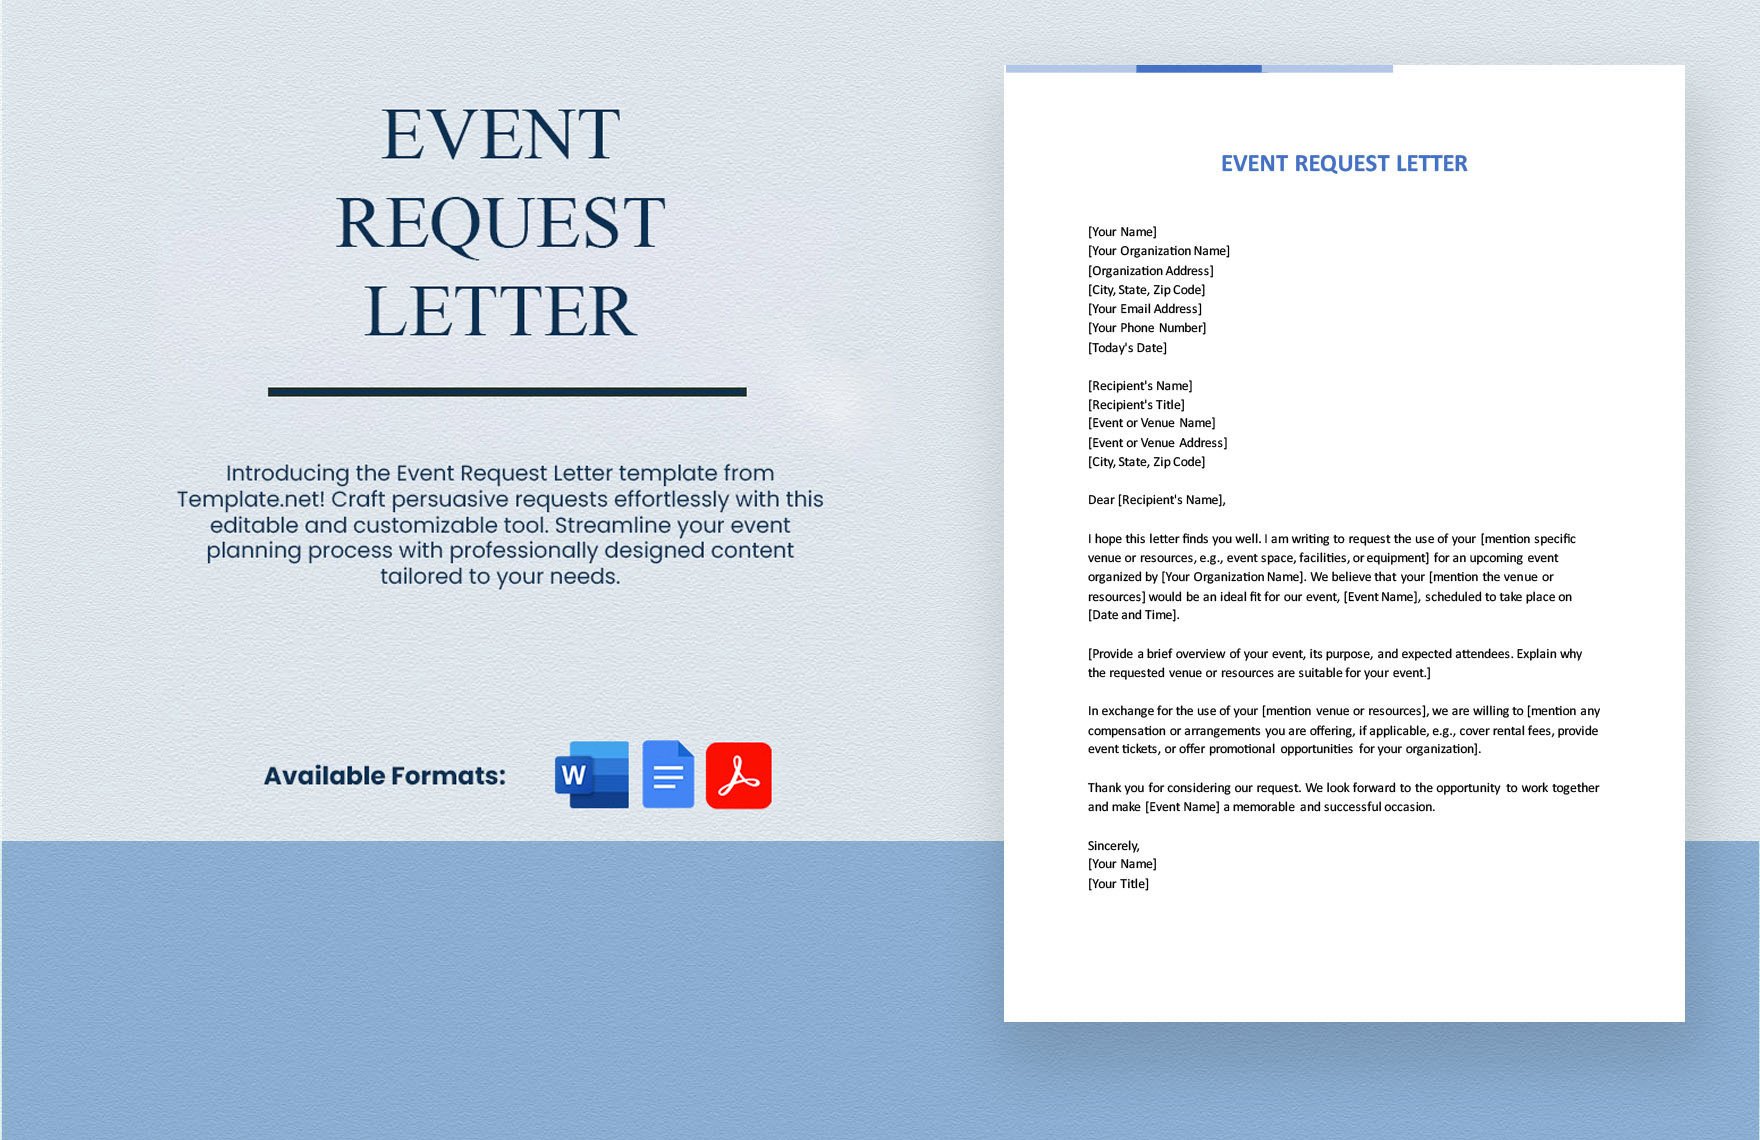 Event Request Letter in Word, Google Docs, PDF